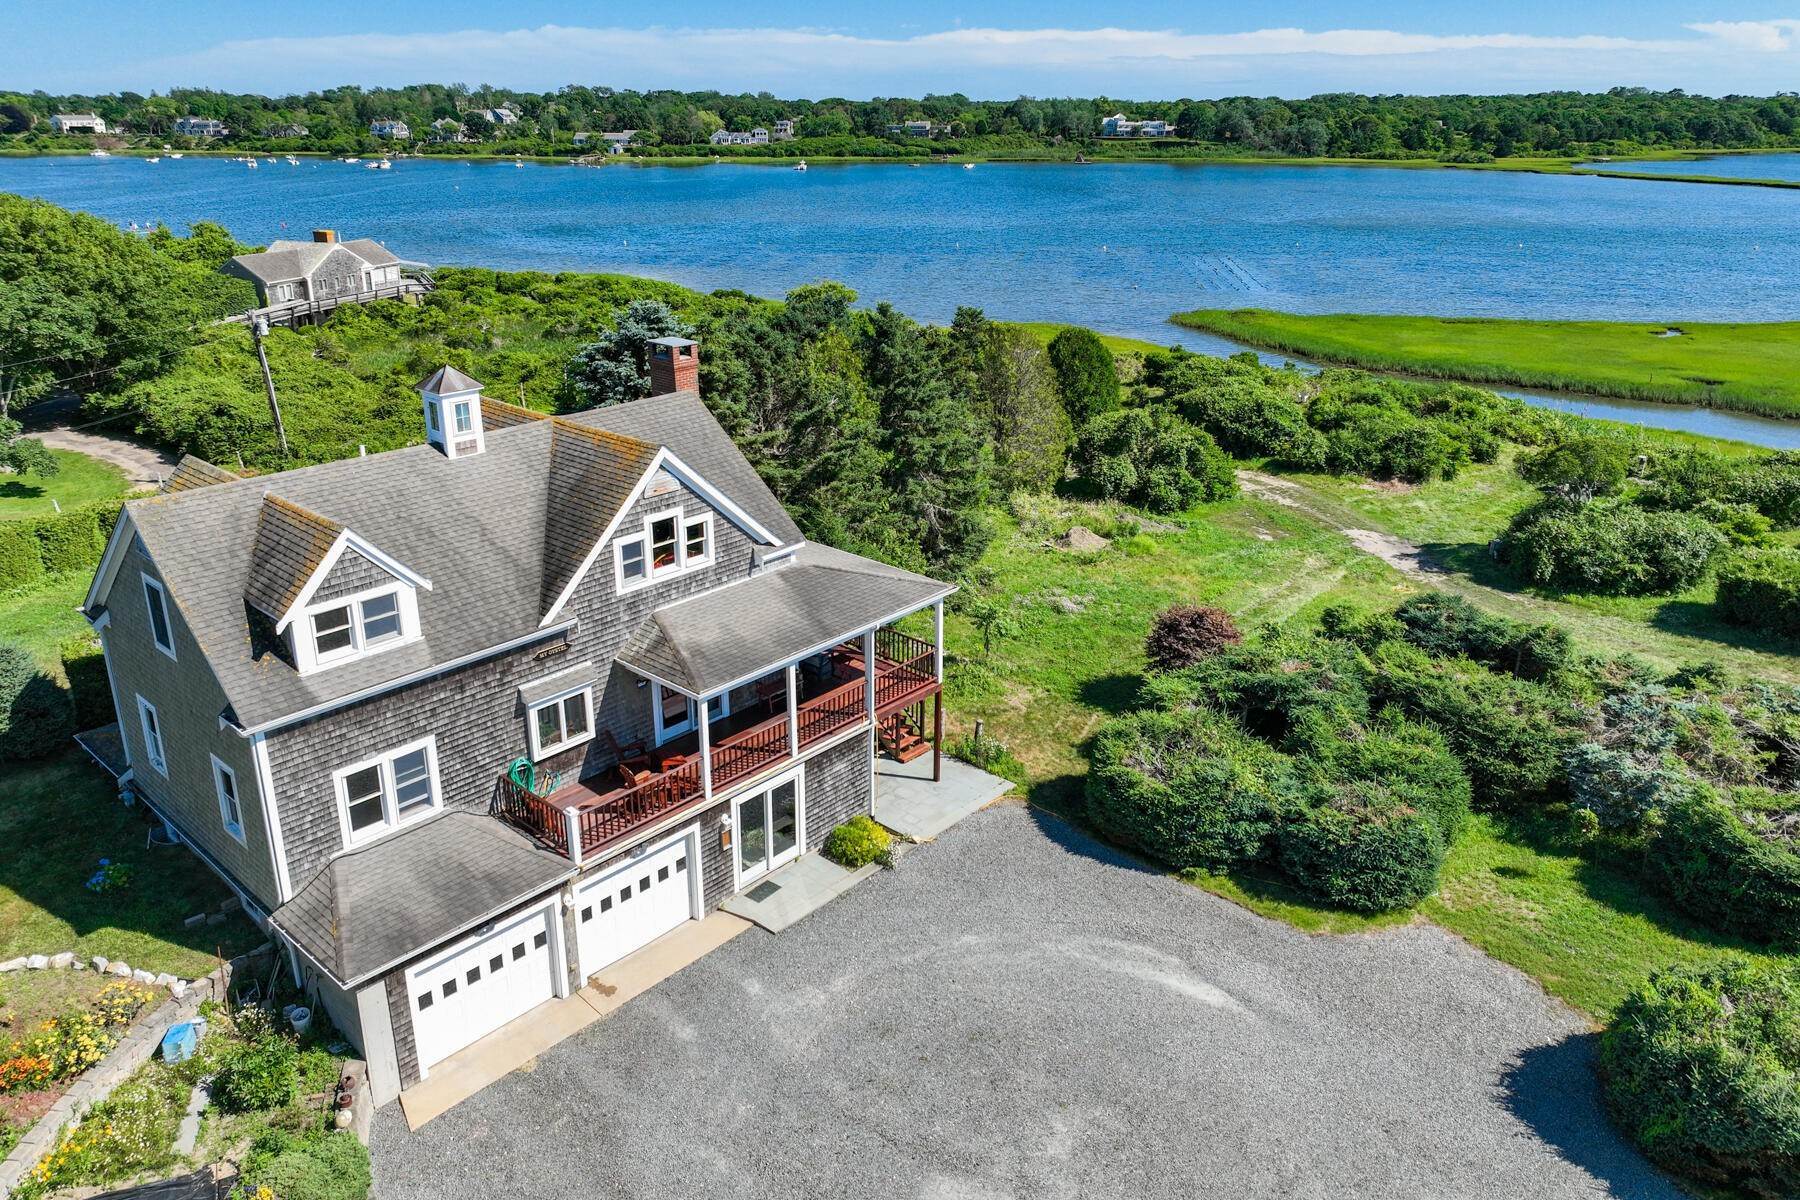 Single Family Homes for Sale at 99 Uncle Albert's Circle, Chatham, MA, 02633 99 Uncle Albert's Circle Chatham, Massachusetts 02633 United States